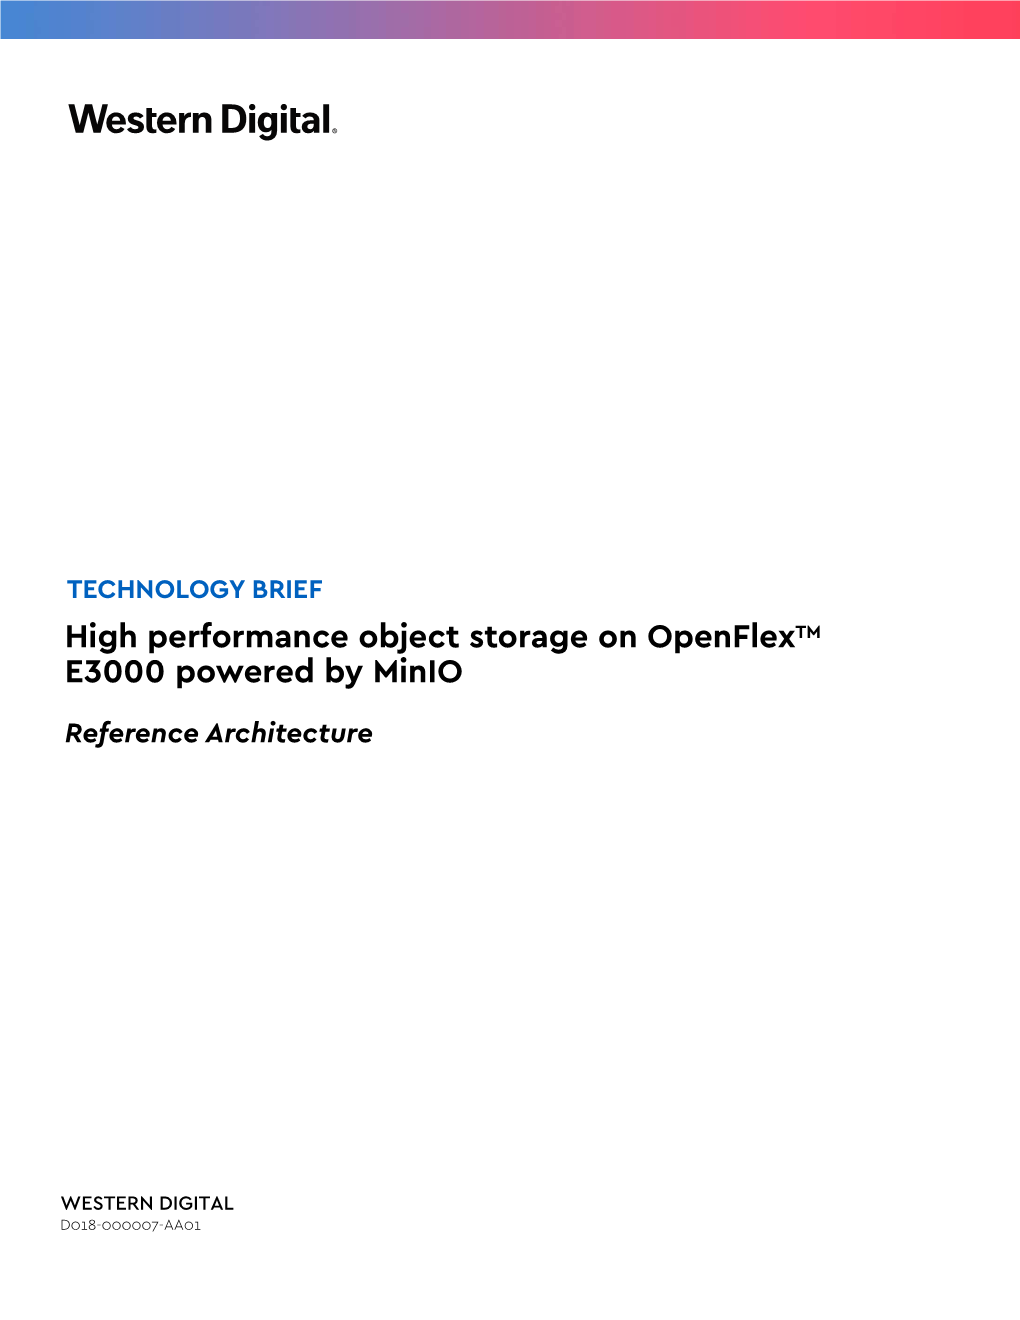 High Performance Object Storage on Openflextm E3000 Powered by Minio